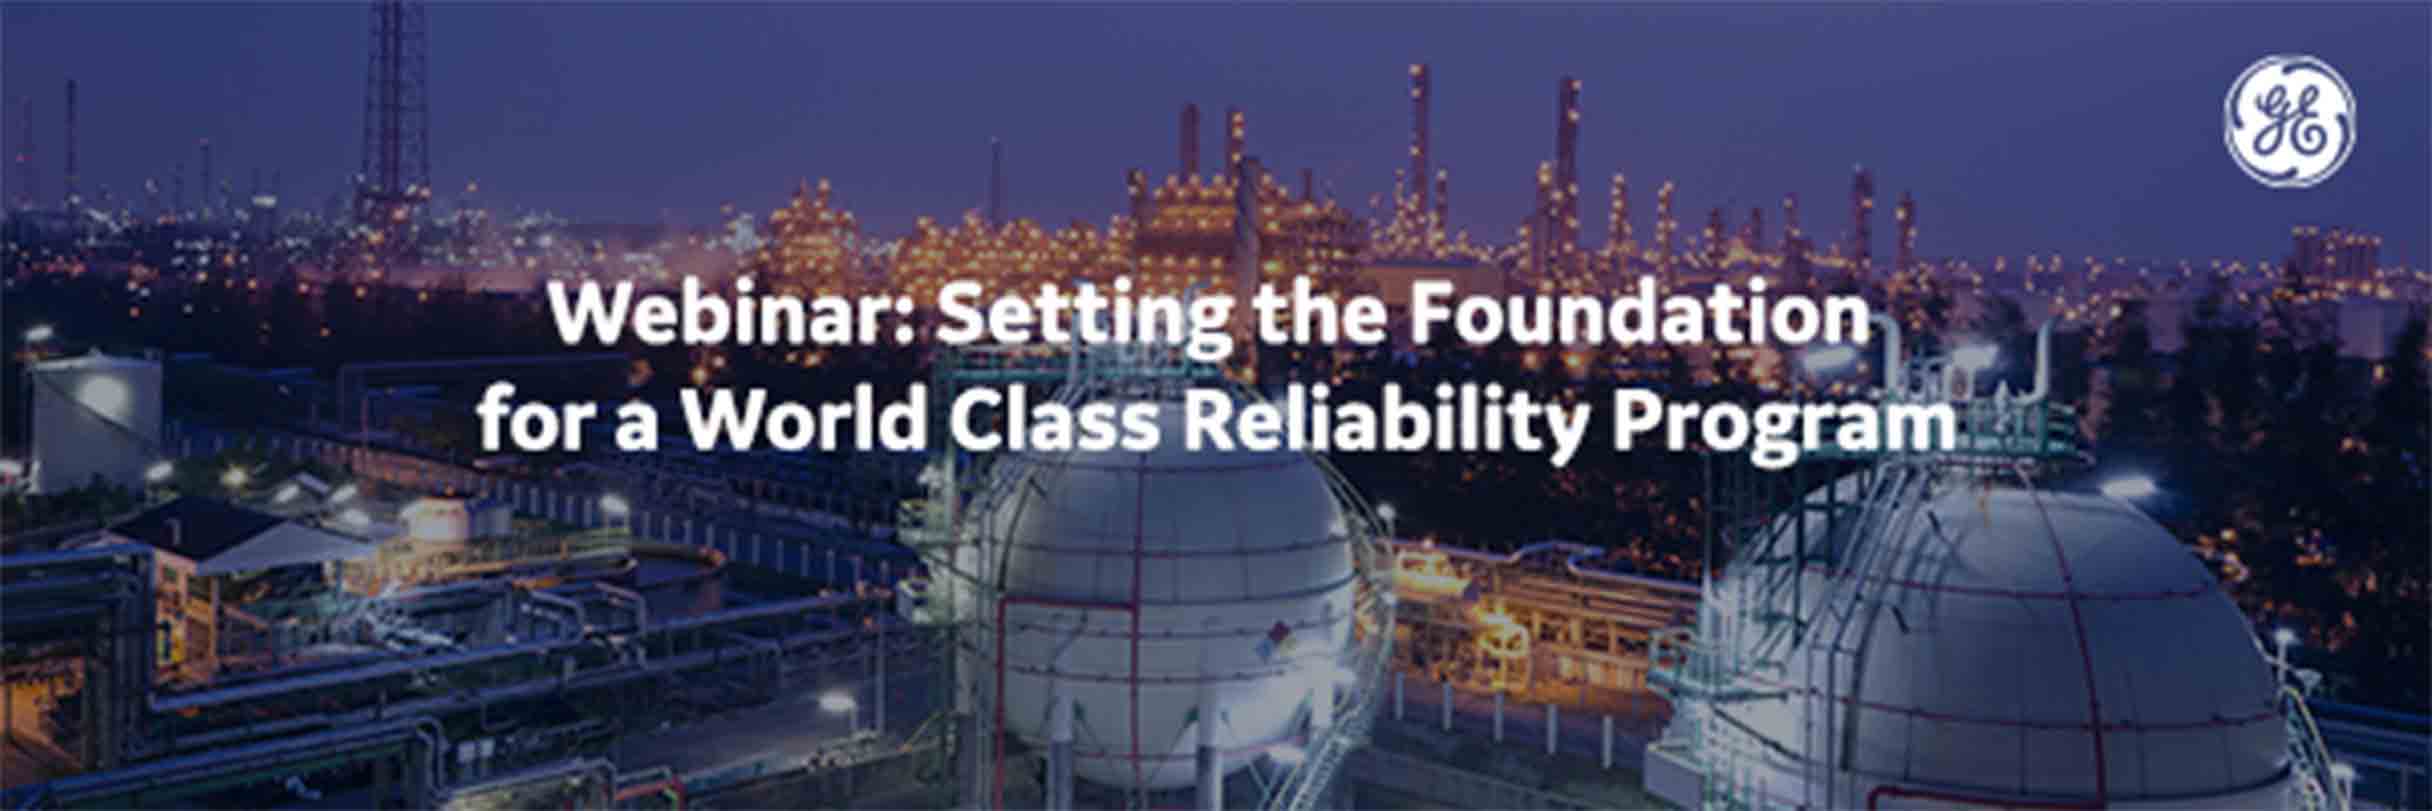 Setting the Foundation for a World Class Reliability Program